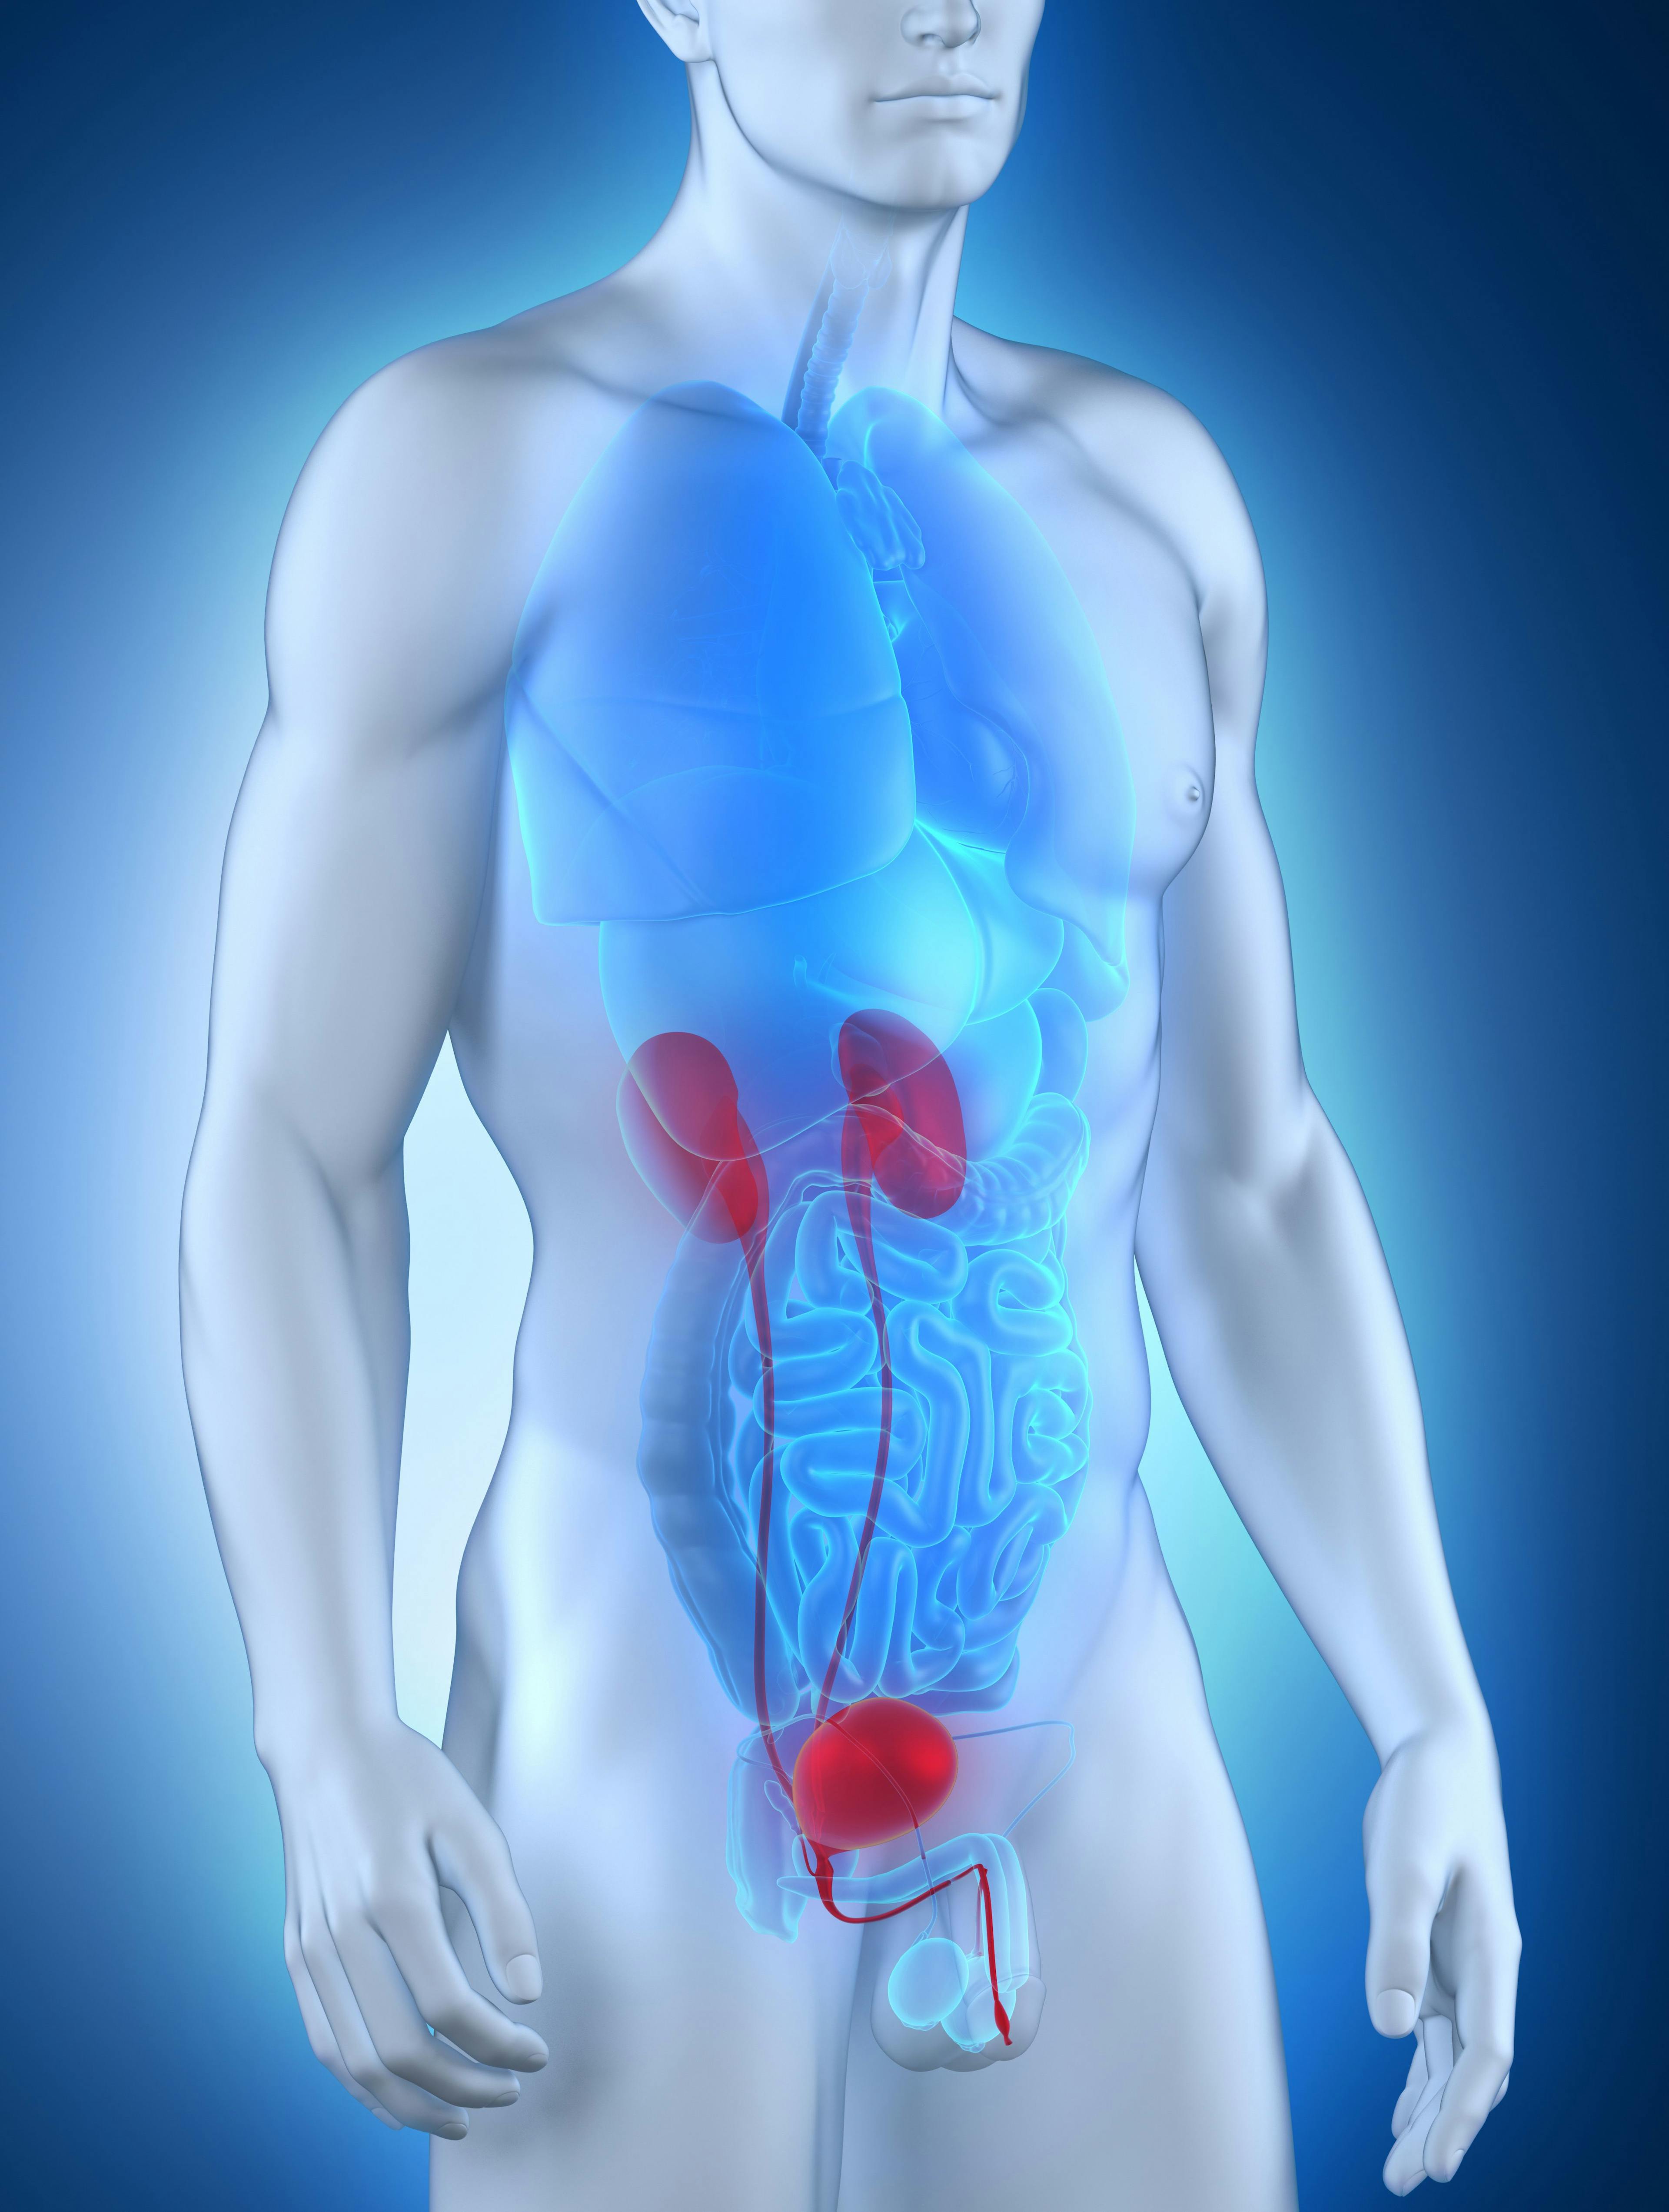 In patients with bacillus Calmette-Guérun–unresponsive non-muscle invasive bladder cancer who are being treated with nadofaragene firadenovec, elevated levels of antibody titers may be able to predict efficacy.